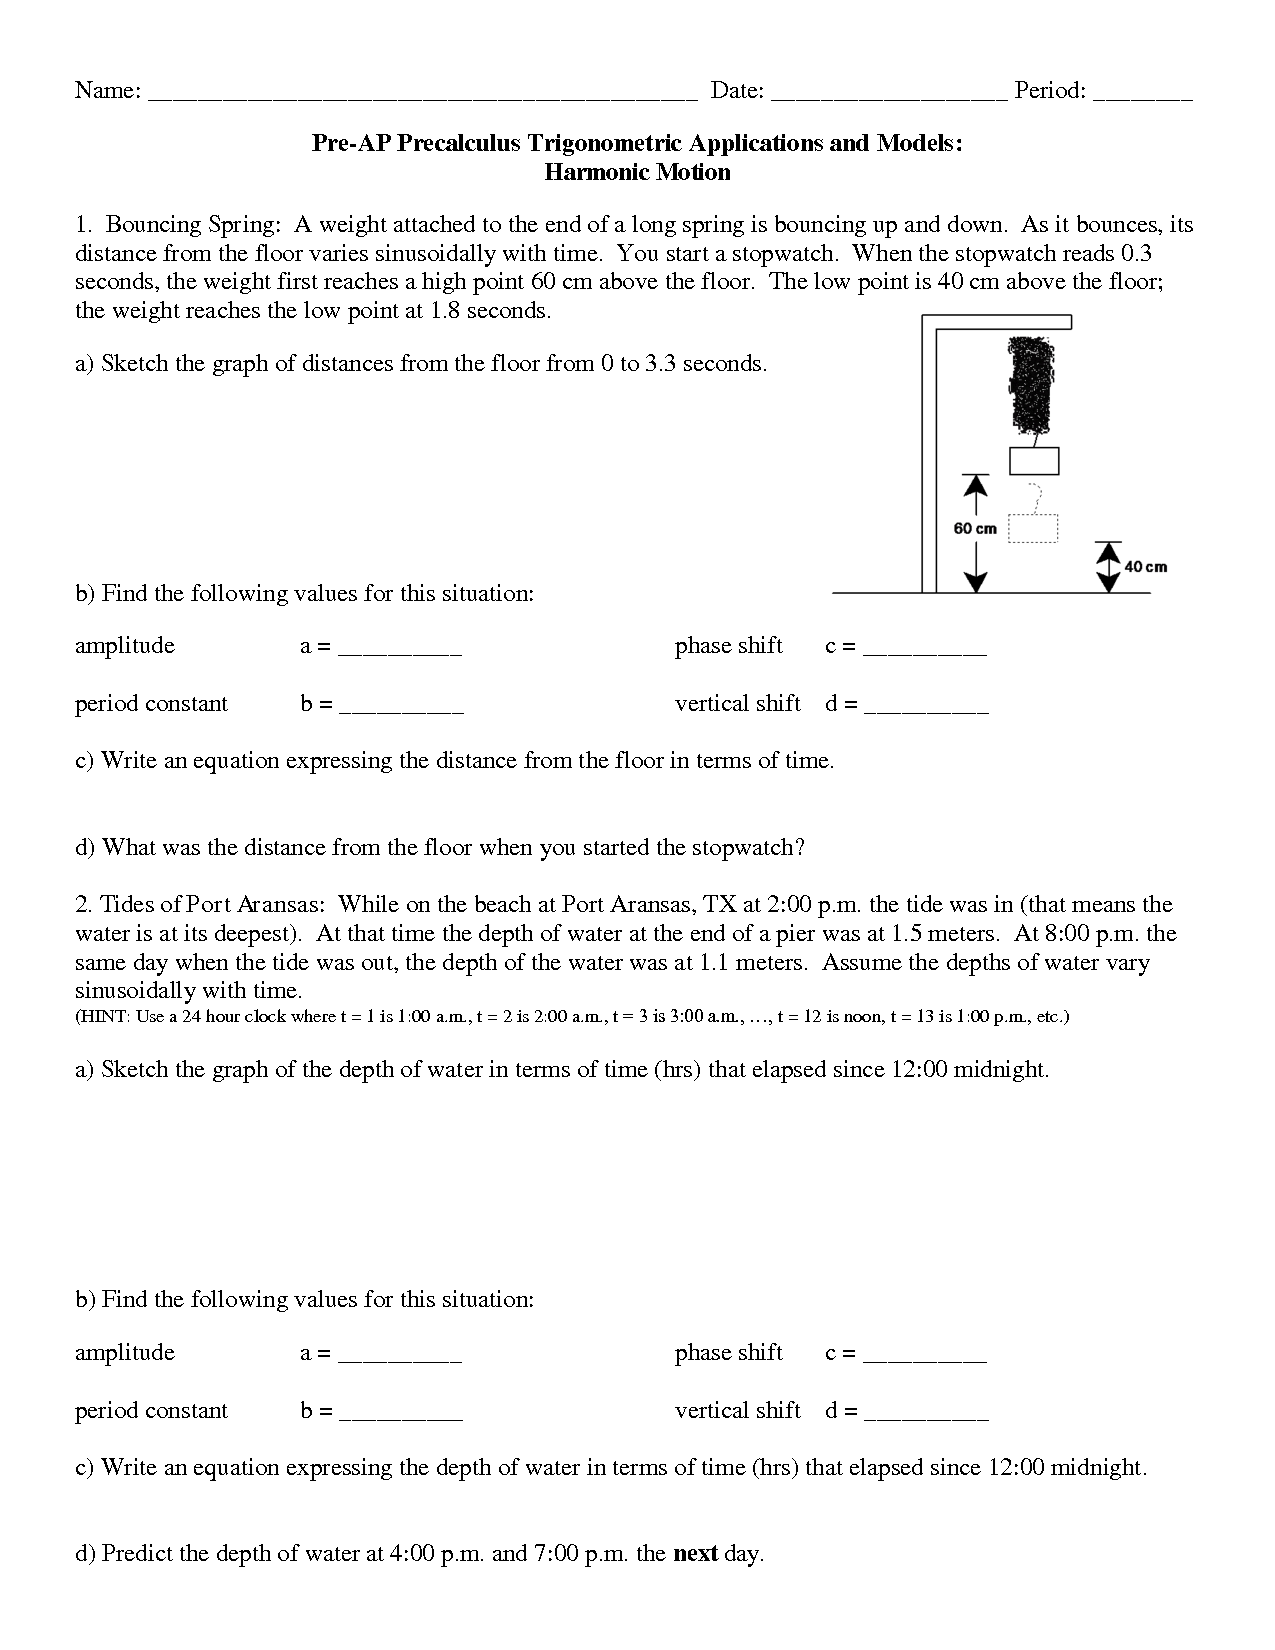 8 Best Images of Pre Calculus Worksheets - Arithmetic and Geometric